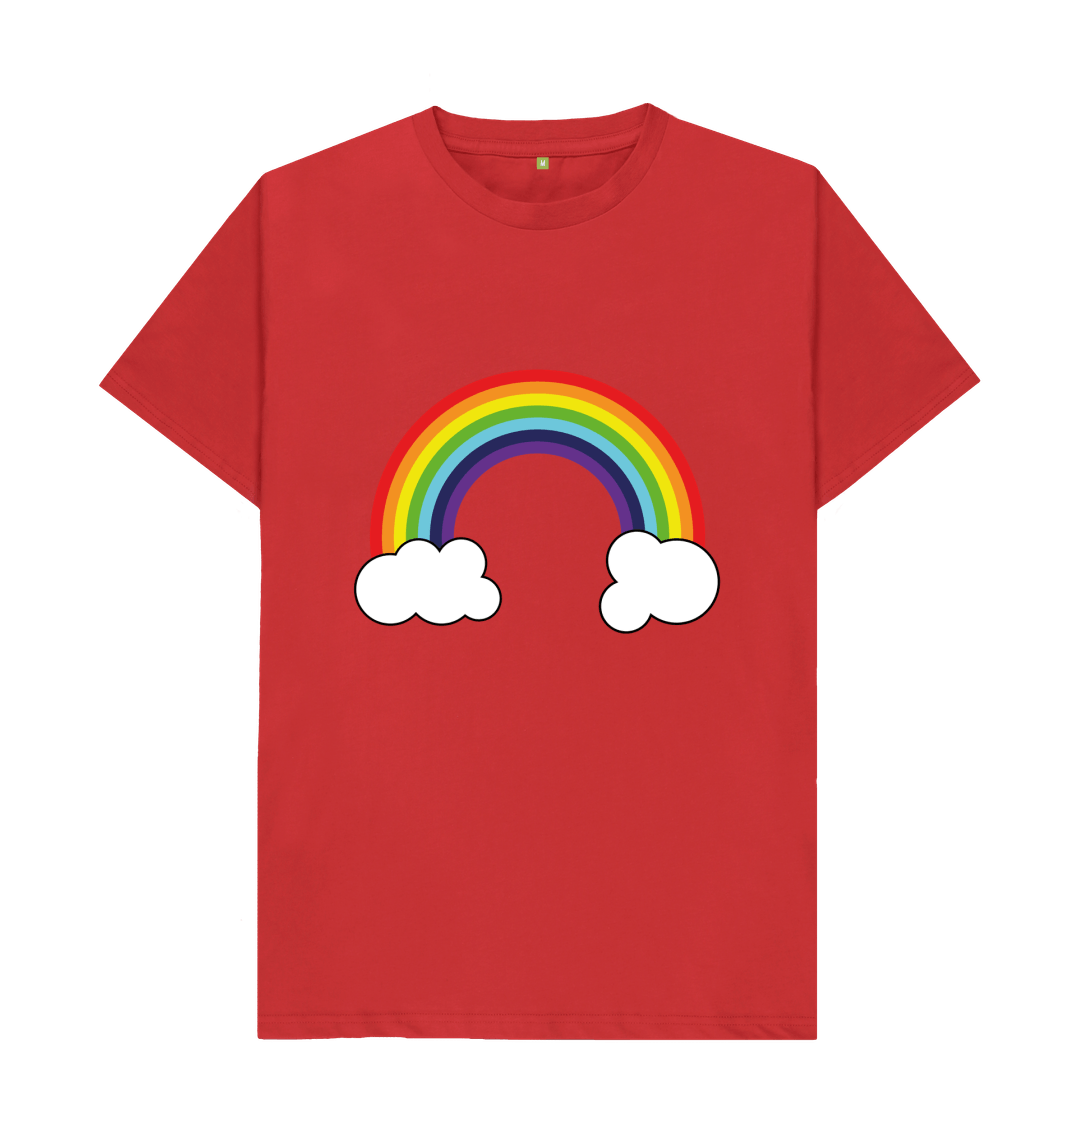 Red Organic Cotton Rainbow Graphic Only Mental Health Men's T-Shirt